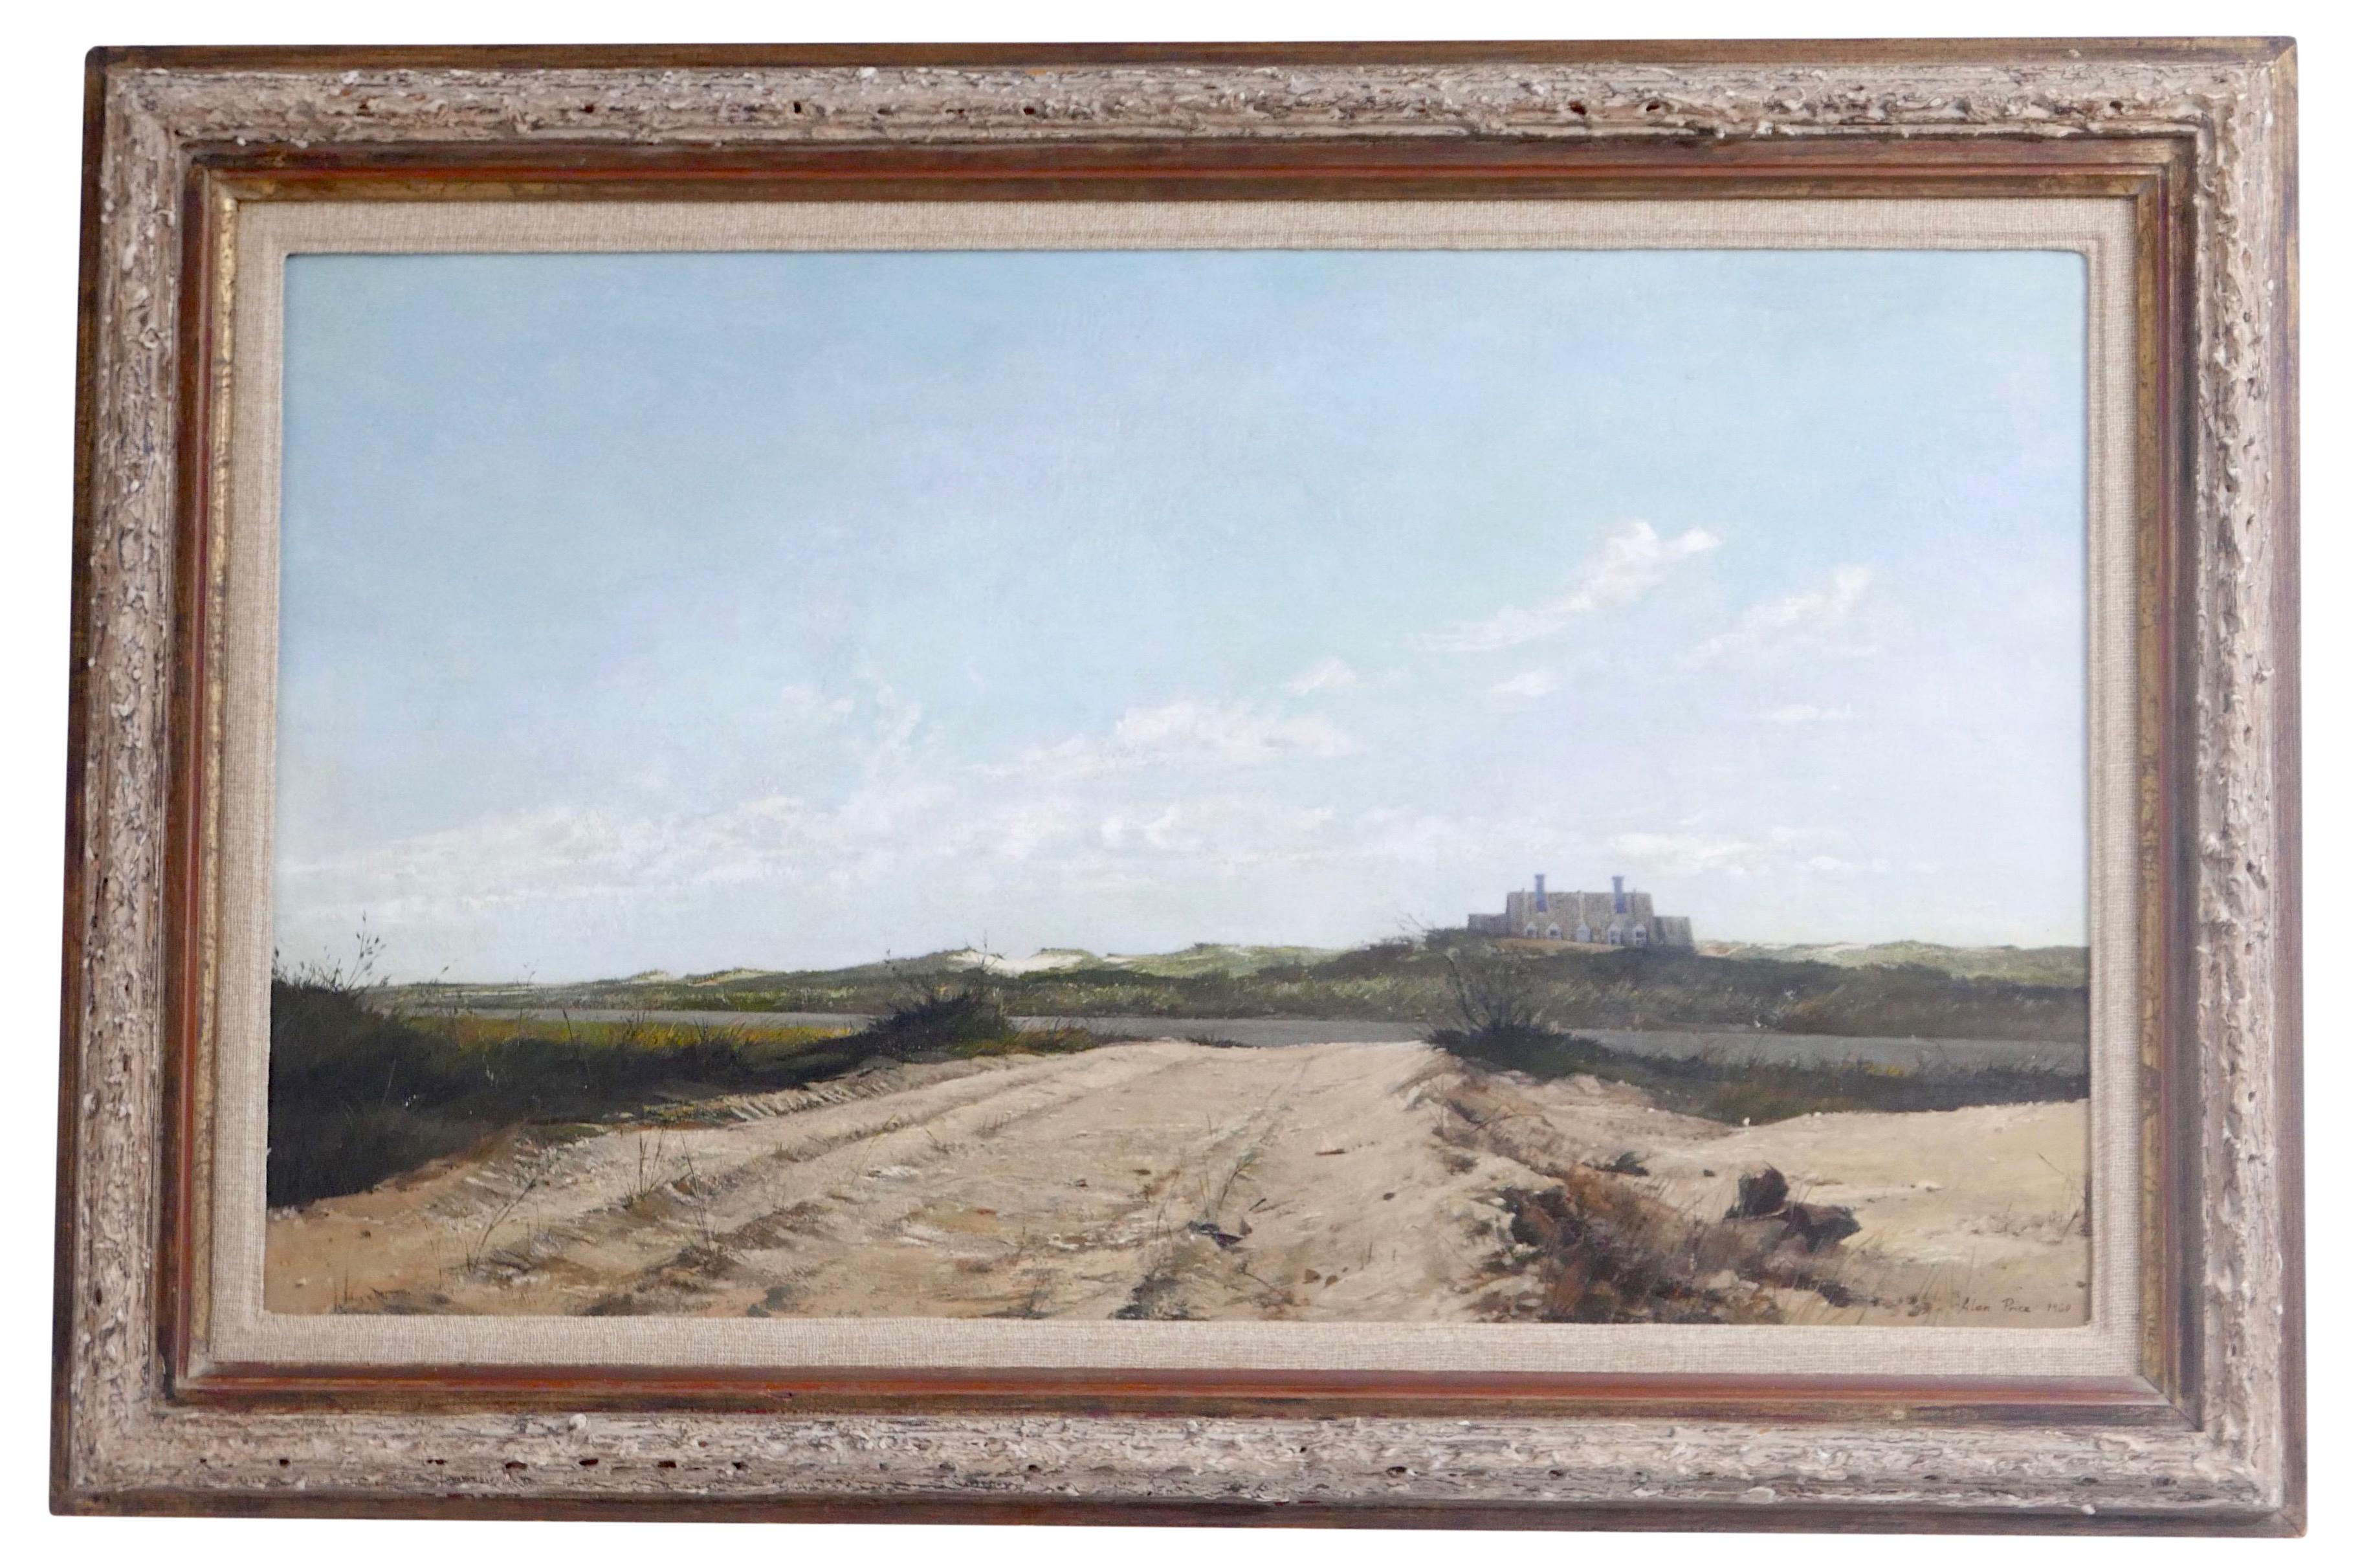 Hamptons landscape painting by Alan Price, dated 1960. Having original gallery label on the back, 